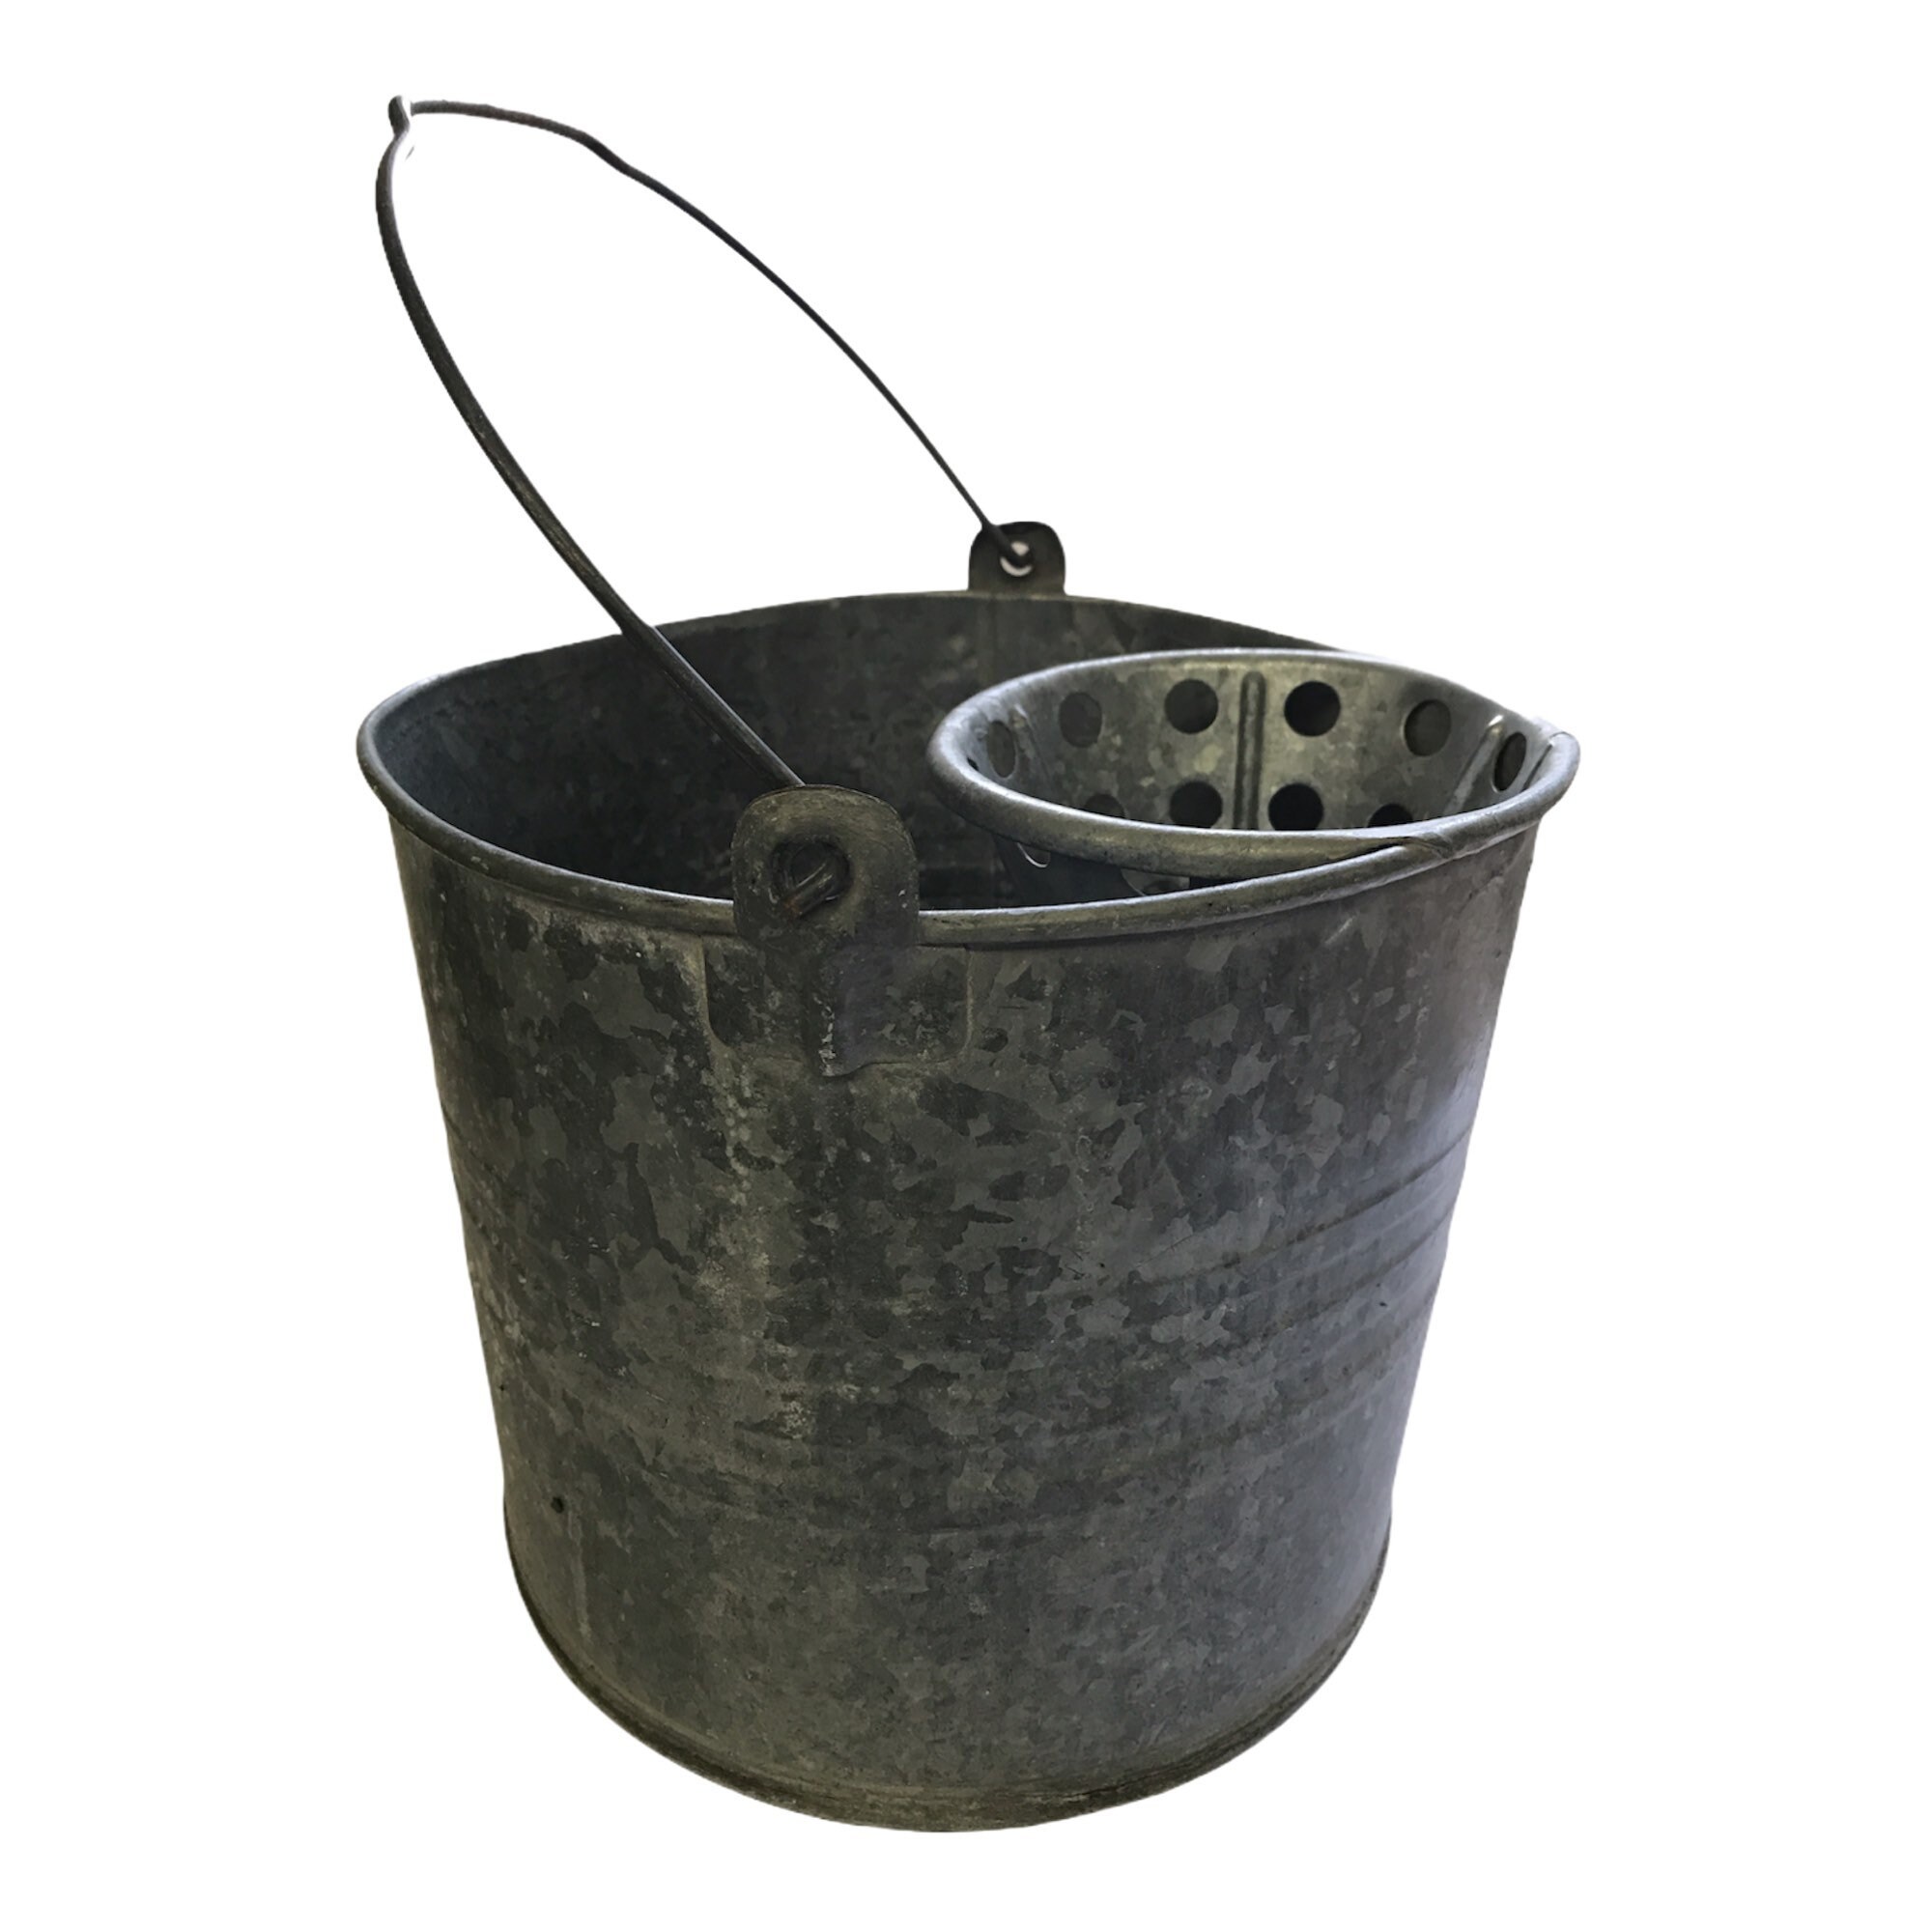 Antique Galvanized Metal Bucket / Pail With Built in Sieve / Strainer -   India